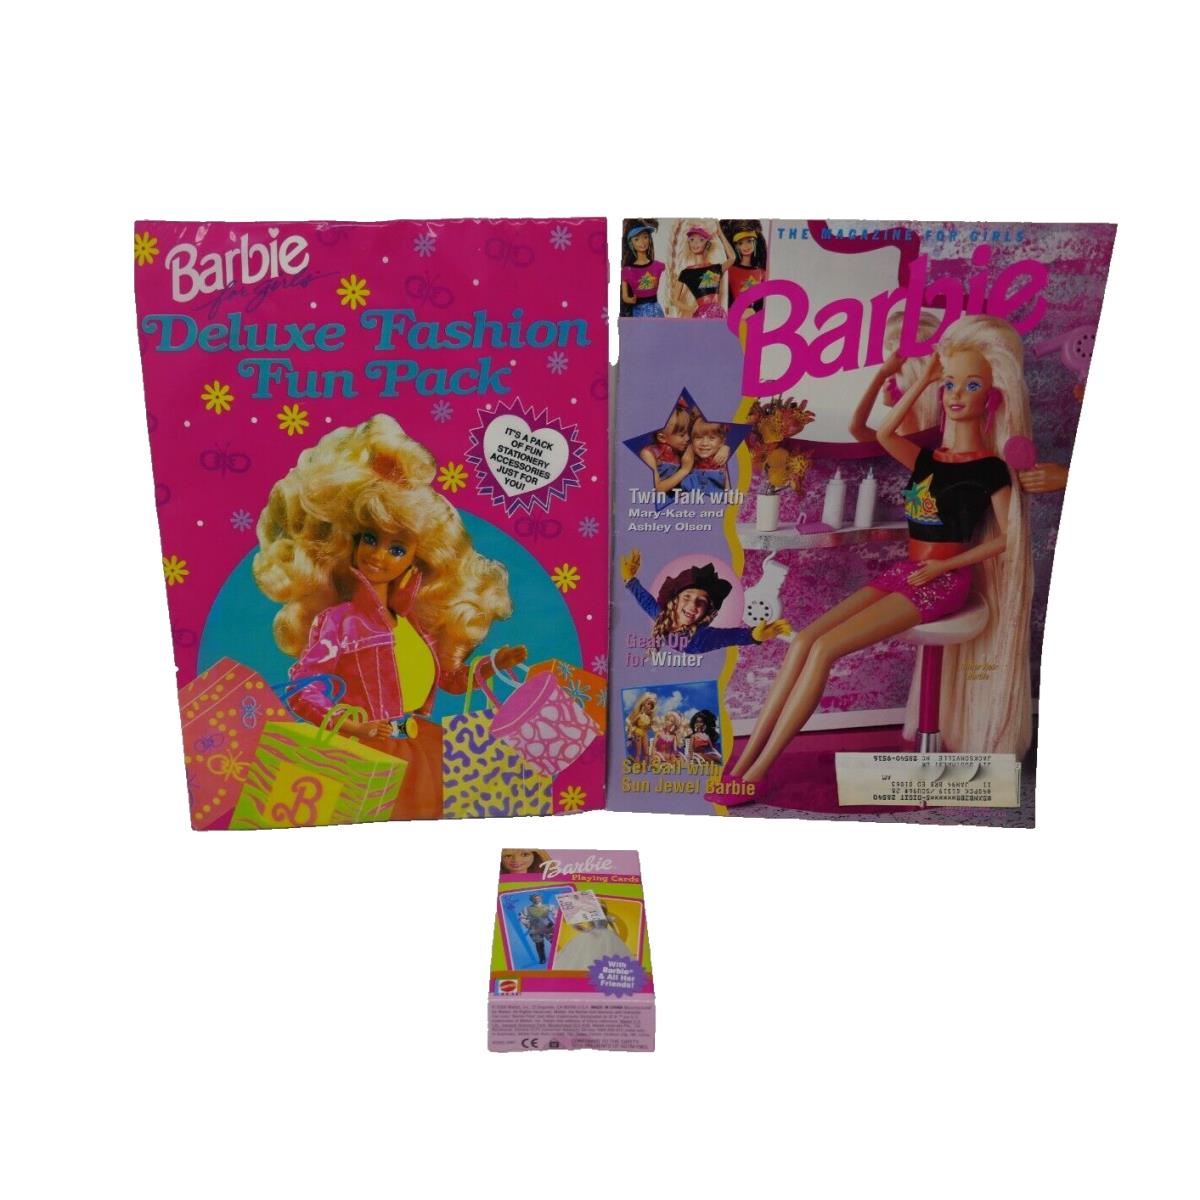 Mattel 1991 Barbie Deluxe Fashion Fun Pack Playing Cards